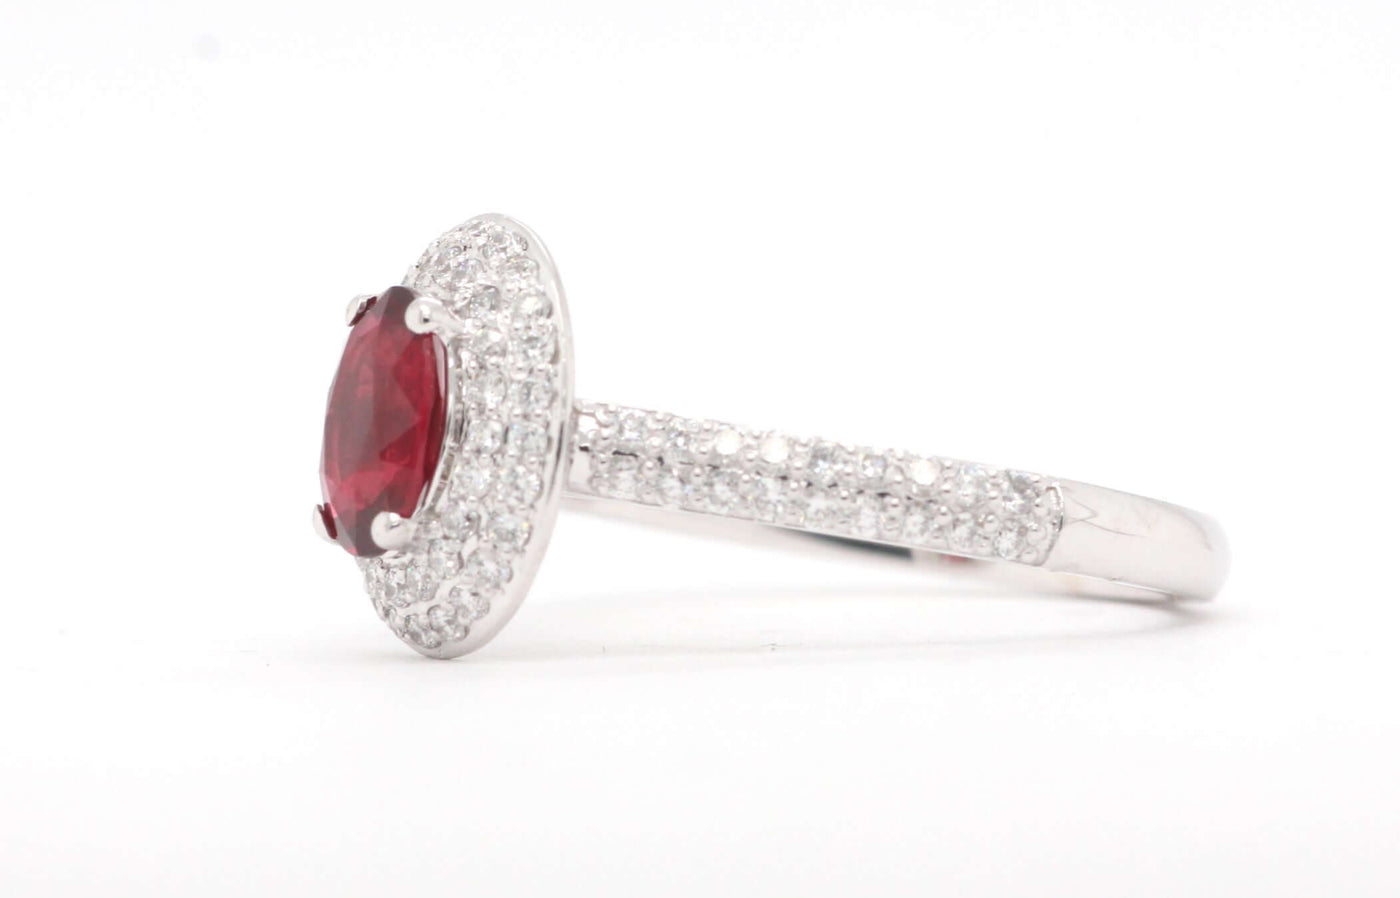 14KW .66 Ct Ruby And Diamond Ring .45 Cttw